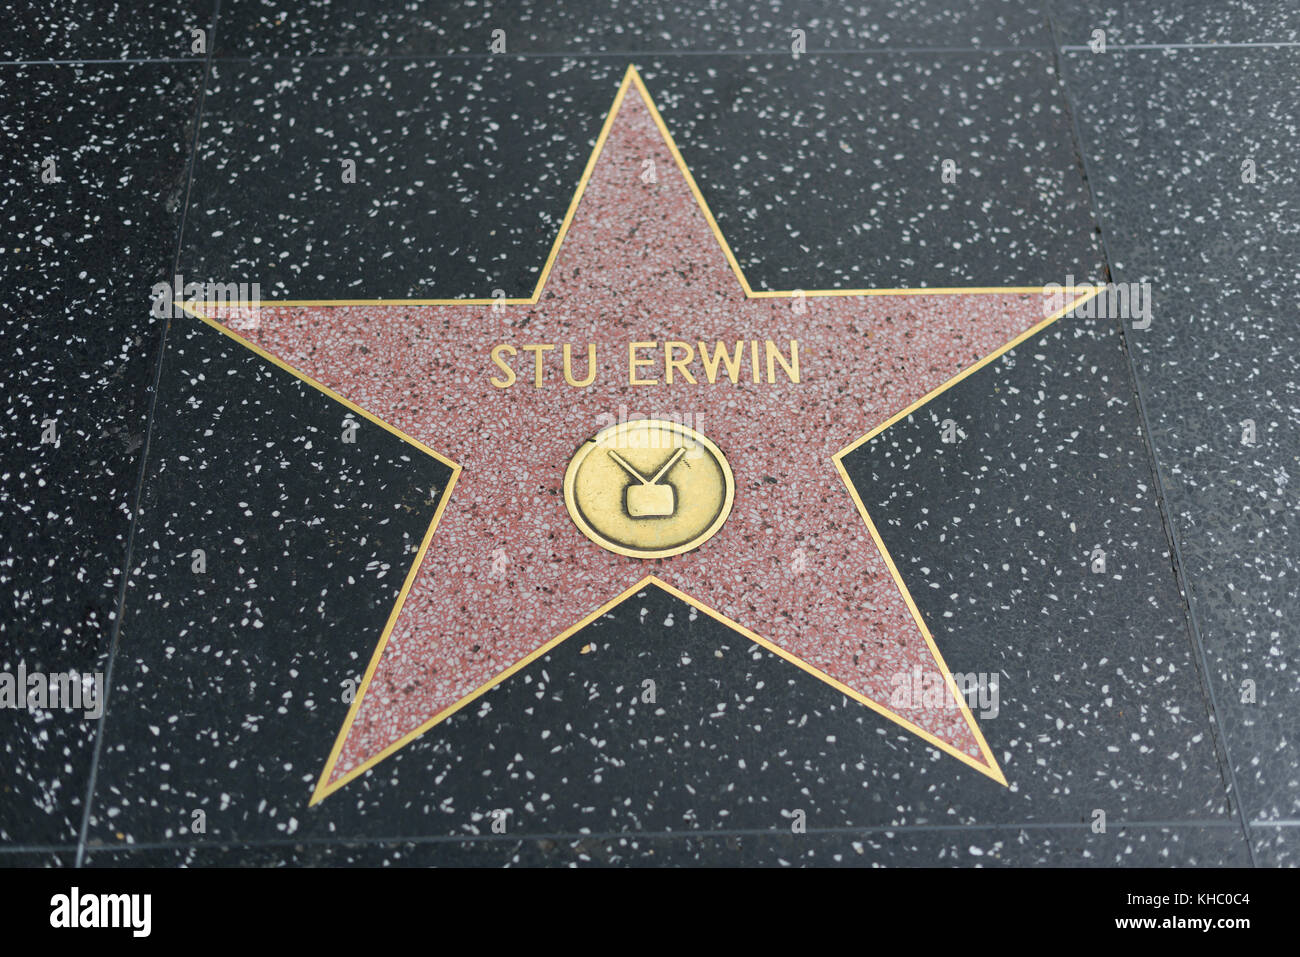 HOLLYWOOD, CA - DECEMBER 06: Stu Erwin star on the Hollywood Walk of Fame in Hollywood, California on Dec. 6, 2016. Stock Photo